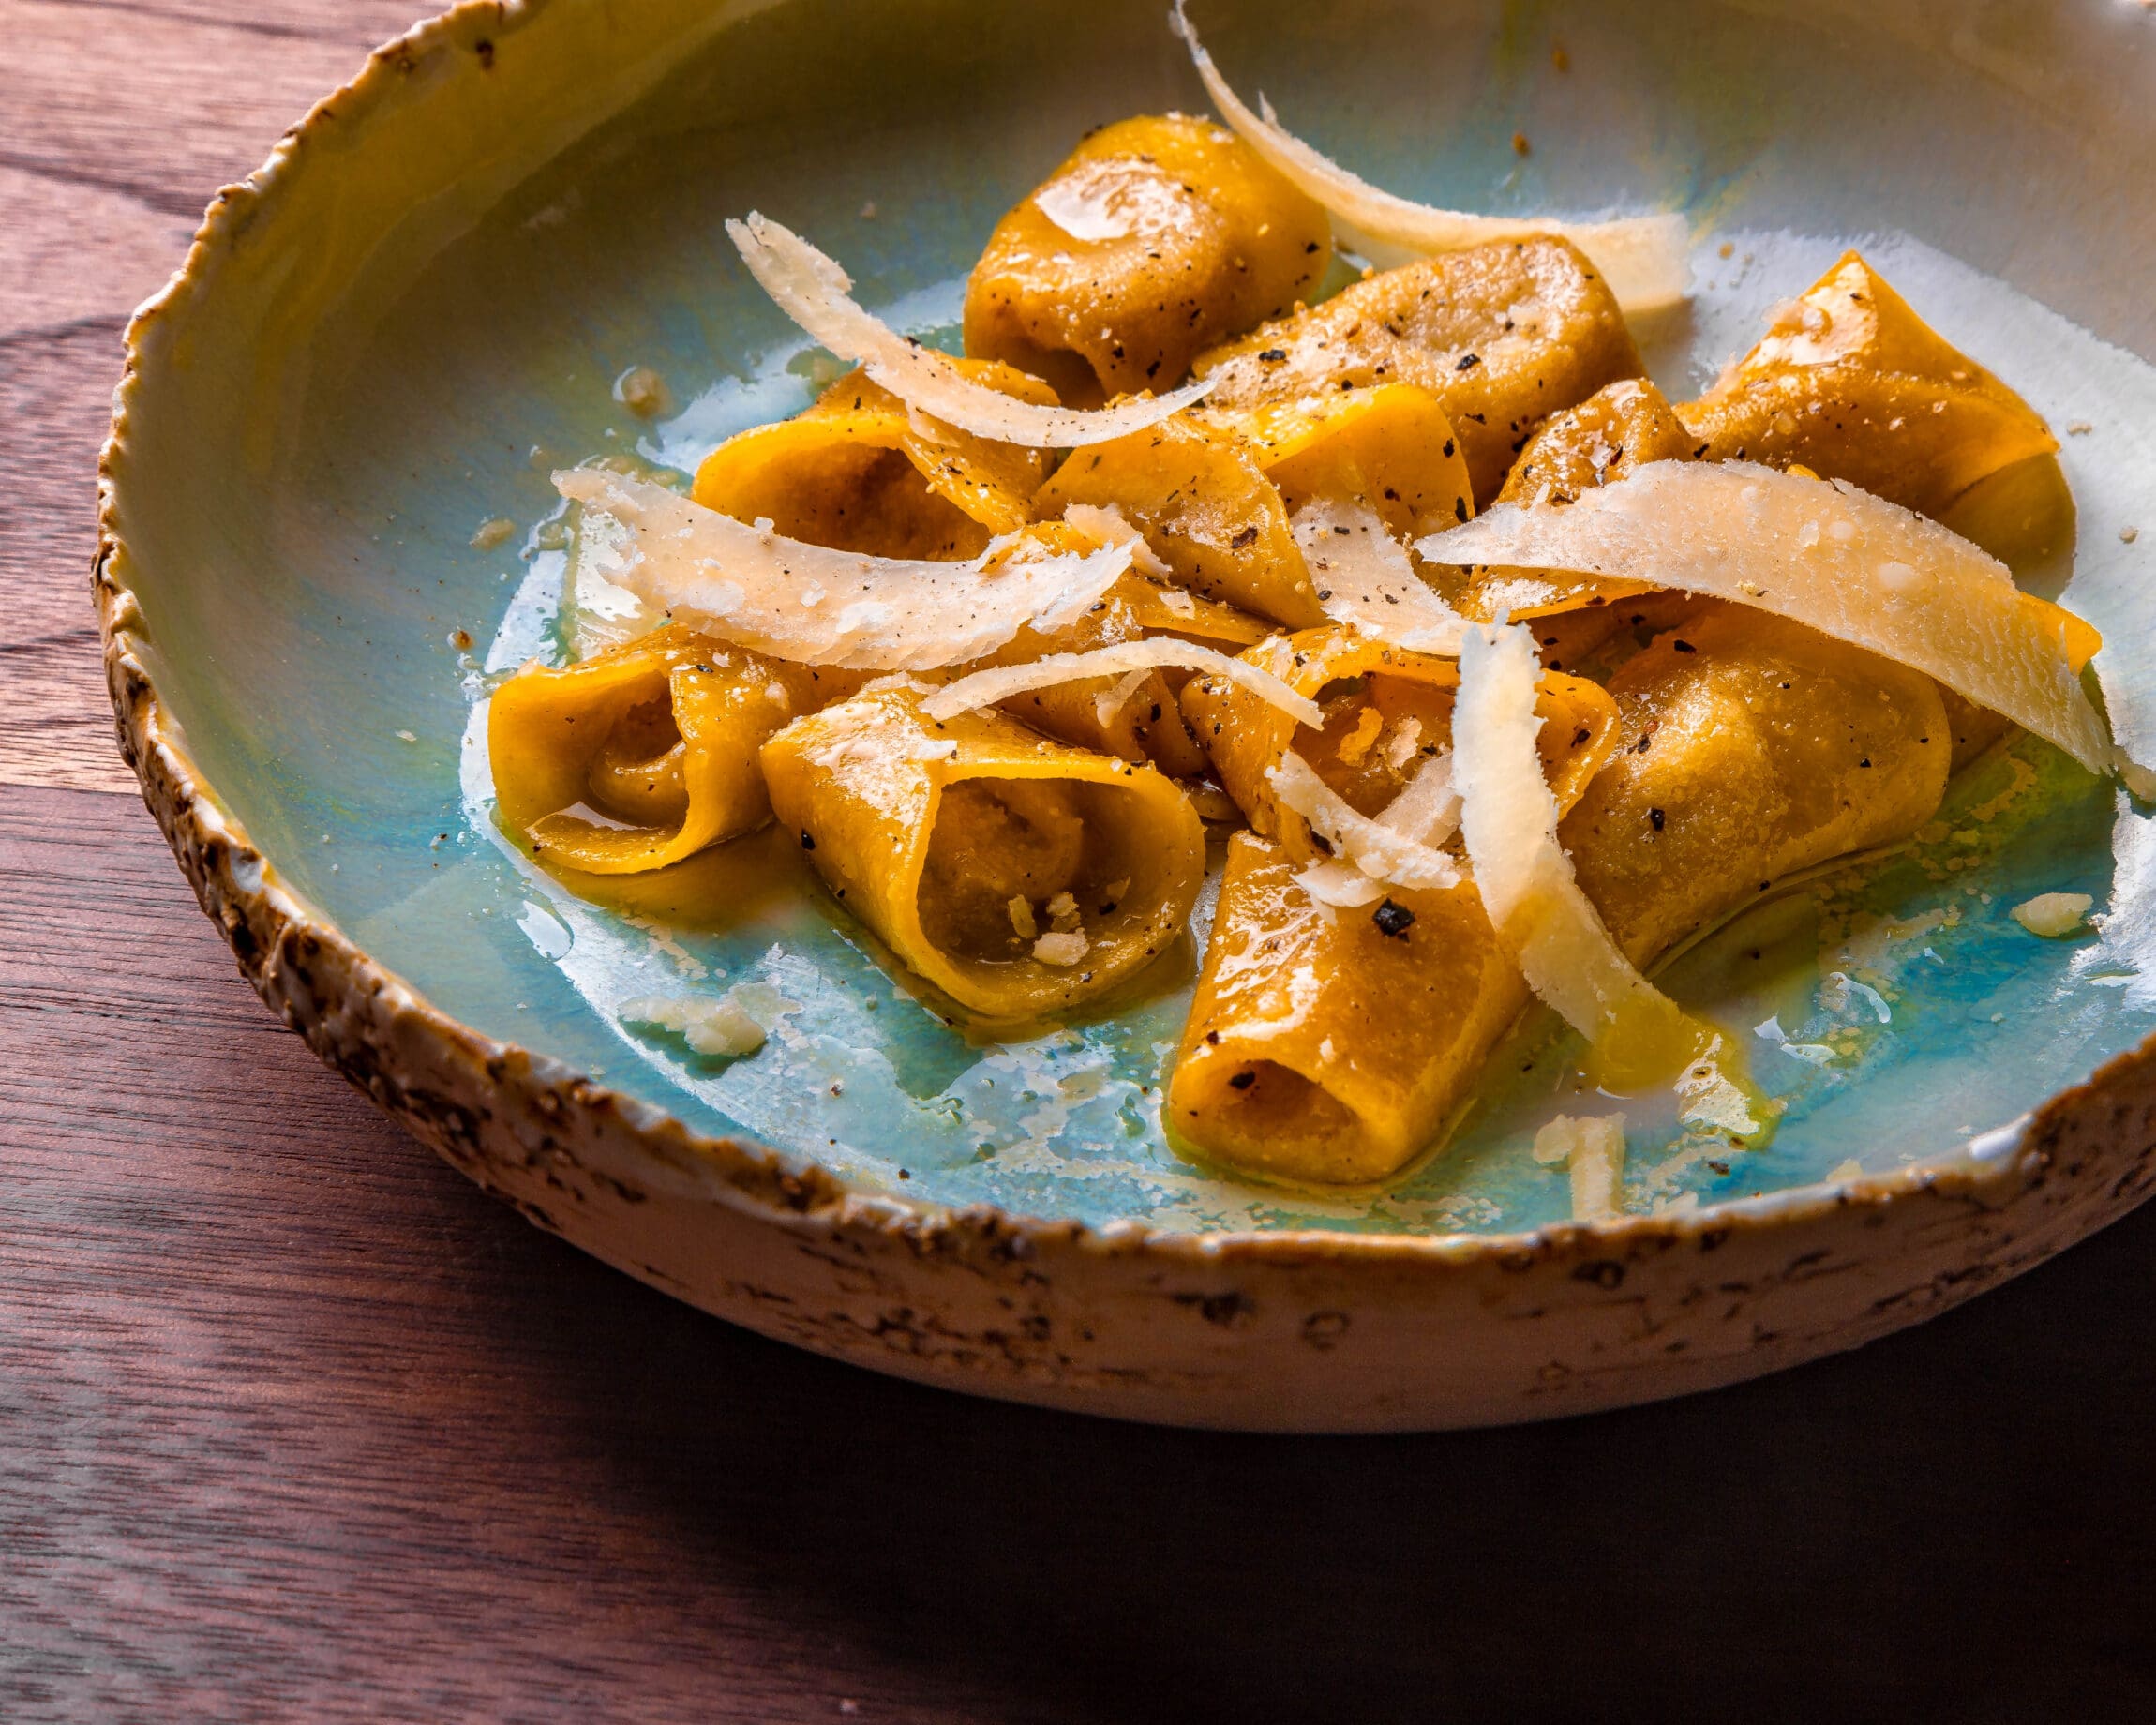 The best restaurants in New York City | Orange coloured pasta dish garnished with parmesan shavings at Foul Witch